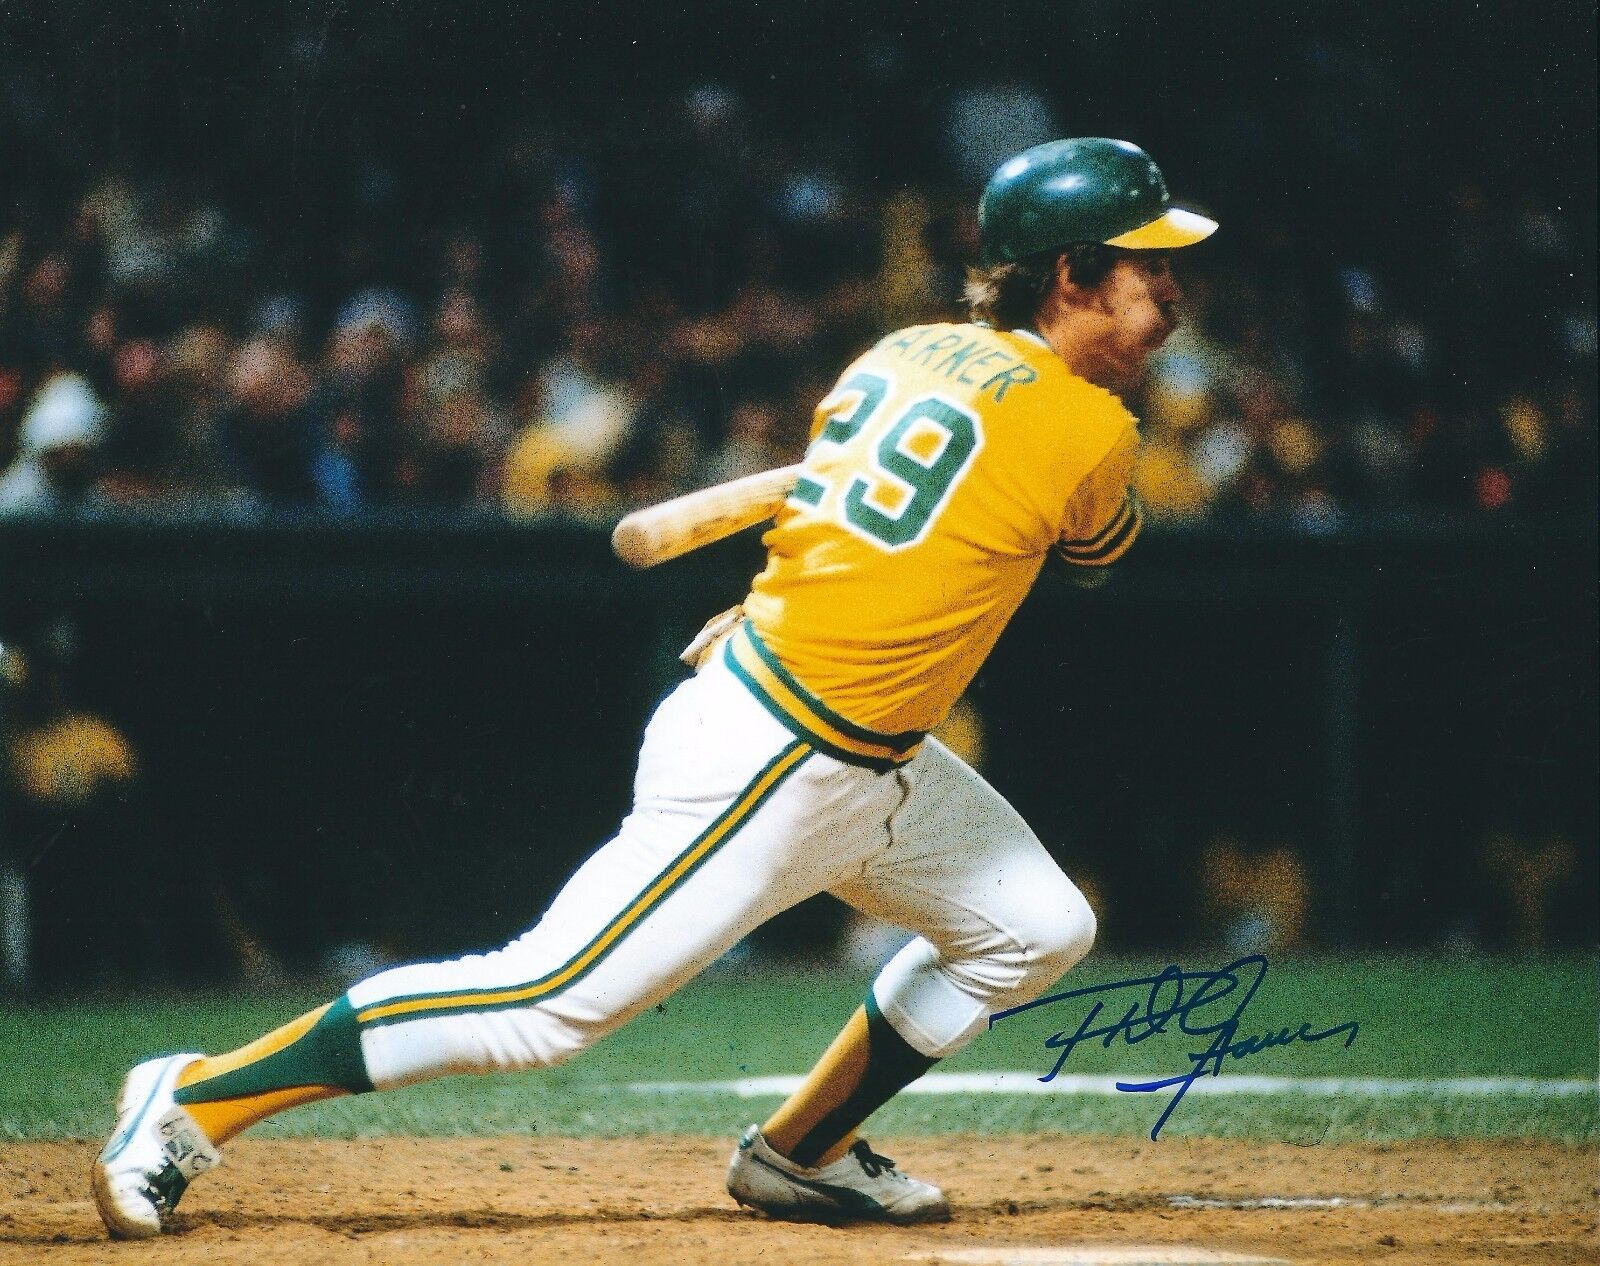 Signed 8x10 PHIL GARNER Oakland A's Autographed Photo Poster painting w/ Show Ticket